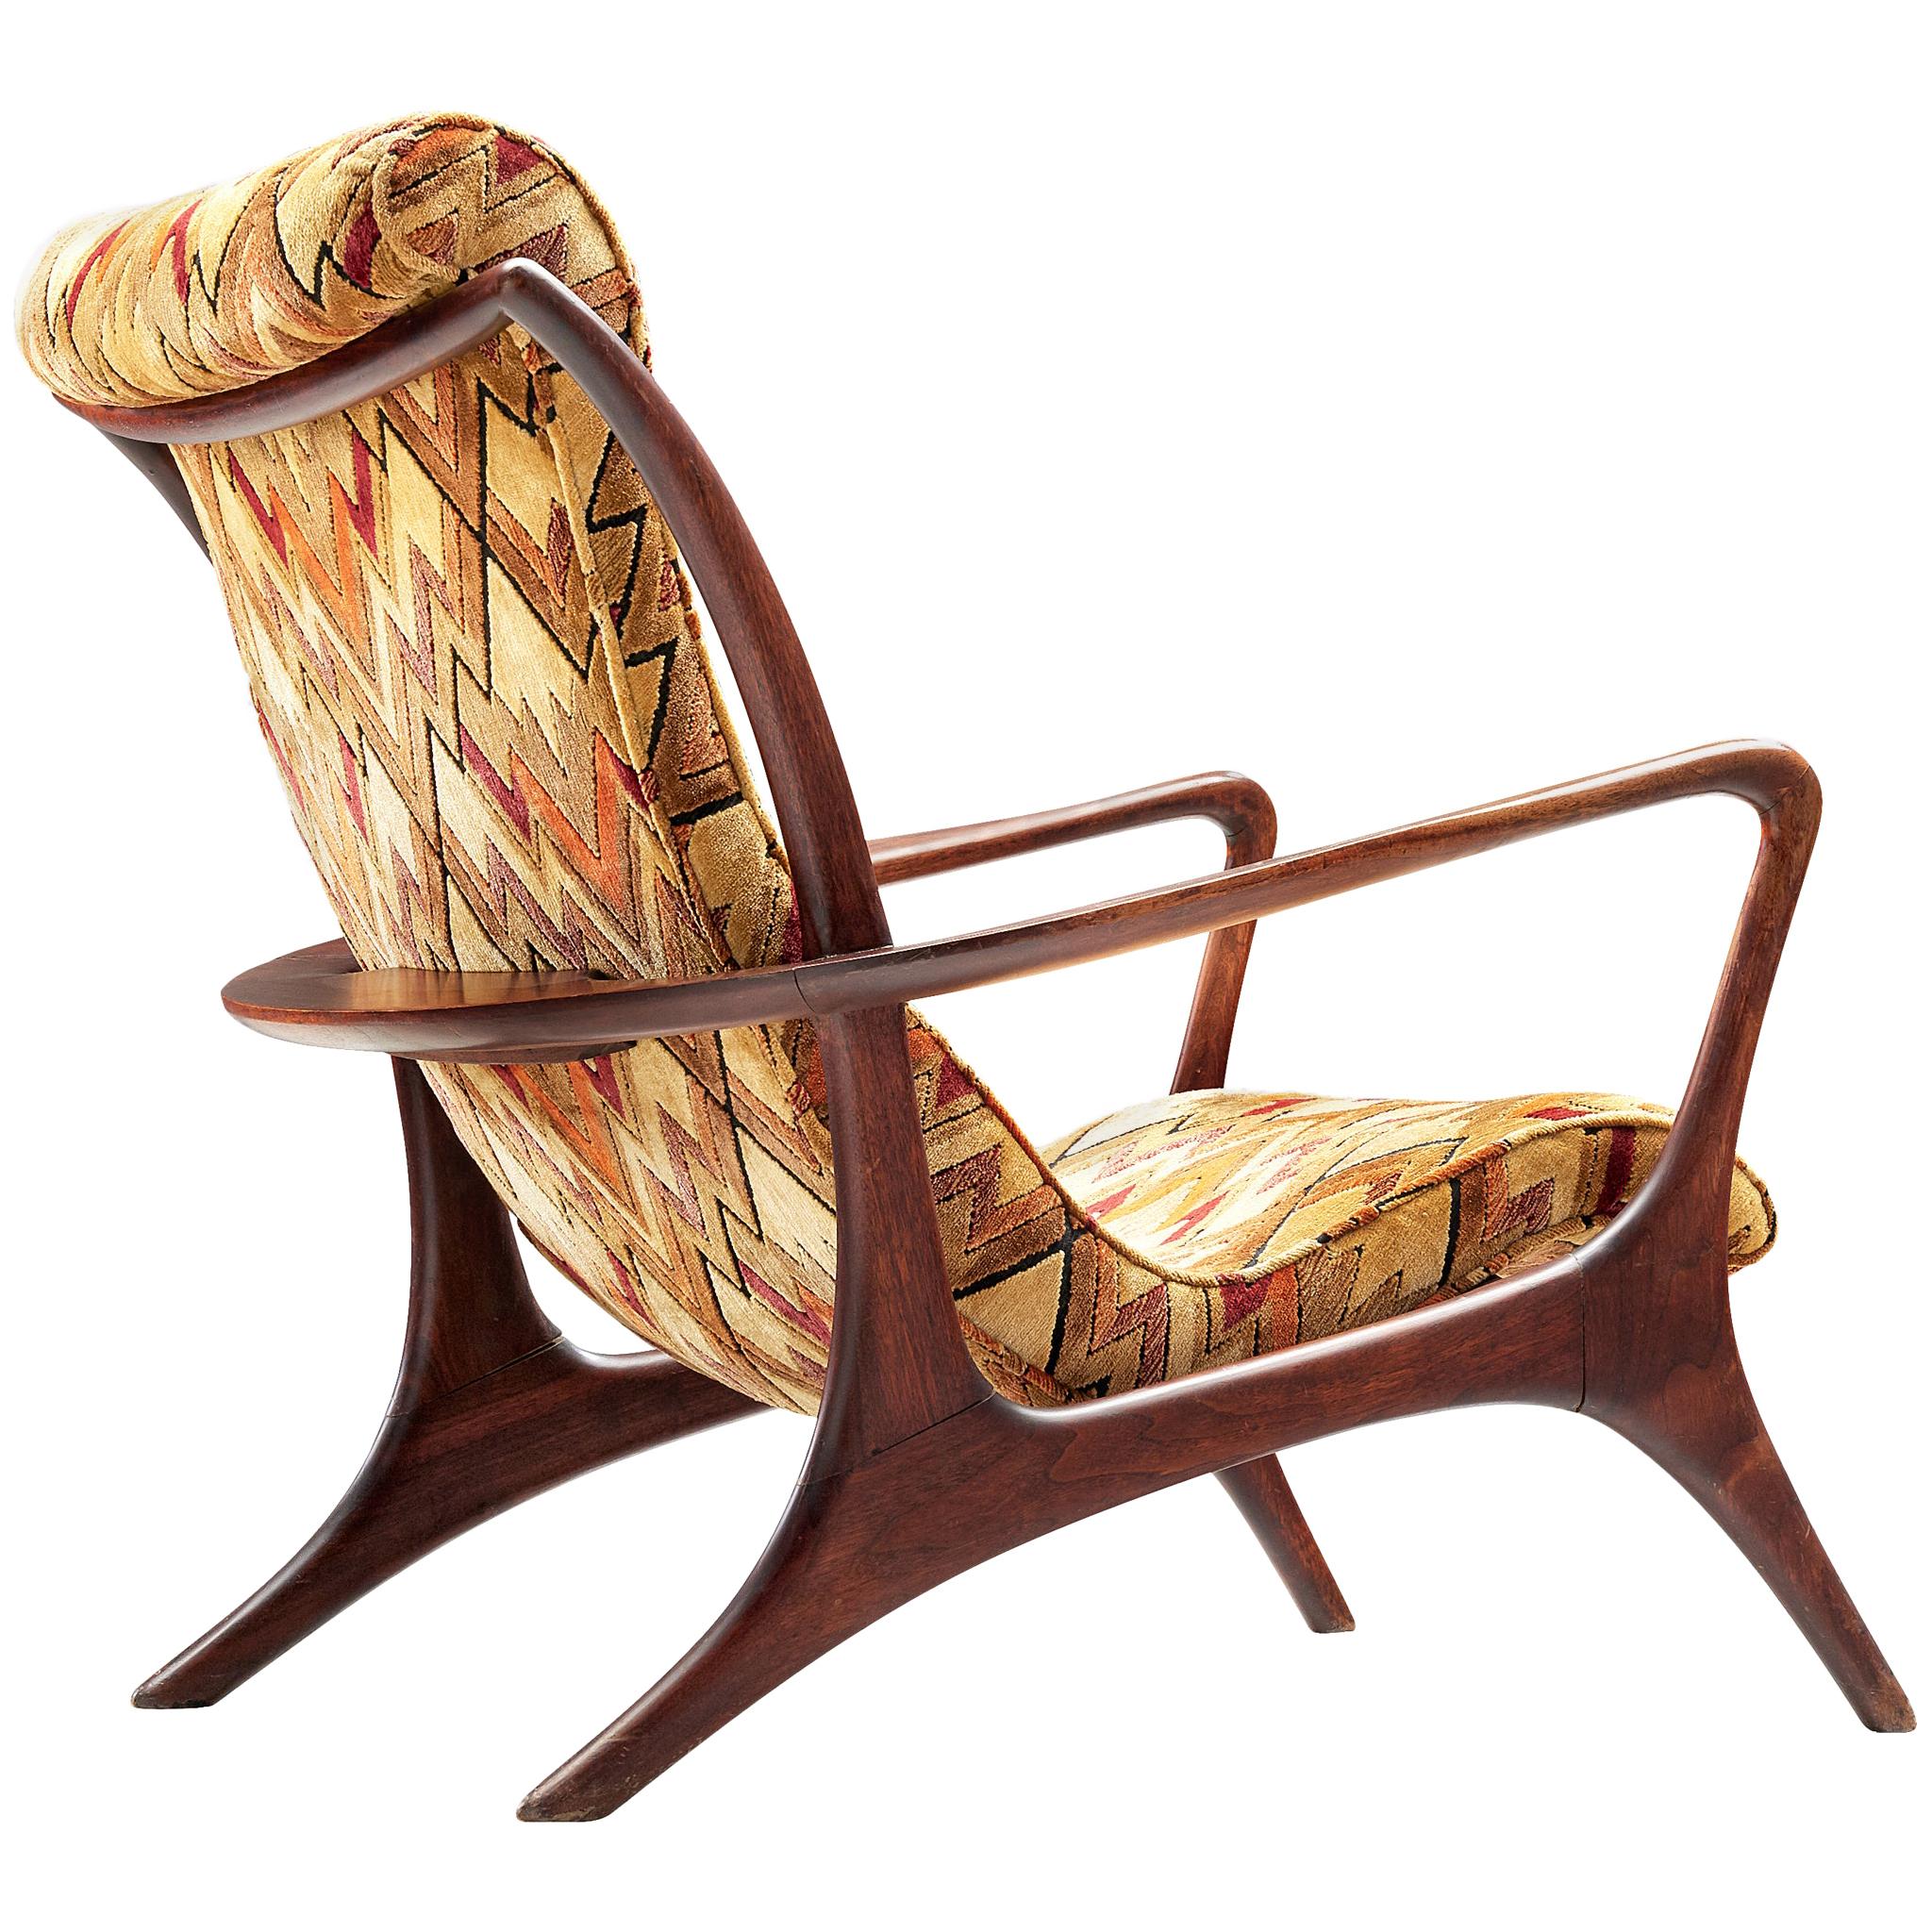 Vladimir Kagan 'Contour' Lounge Chair in Patterned Upholstery